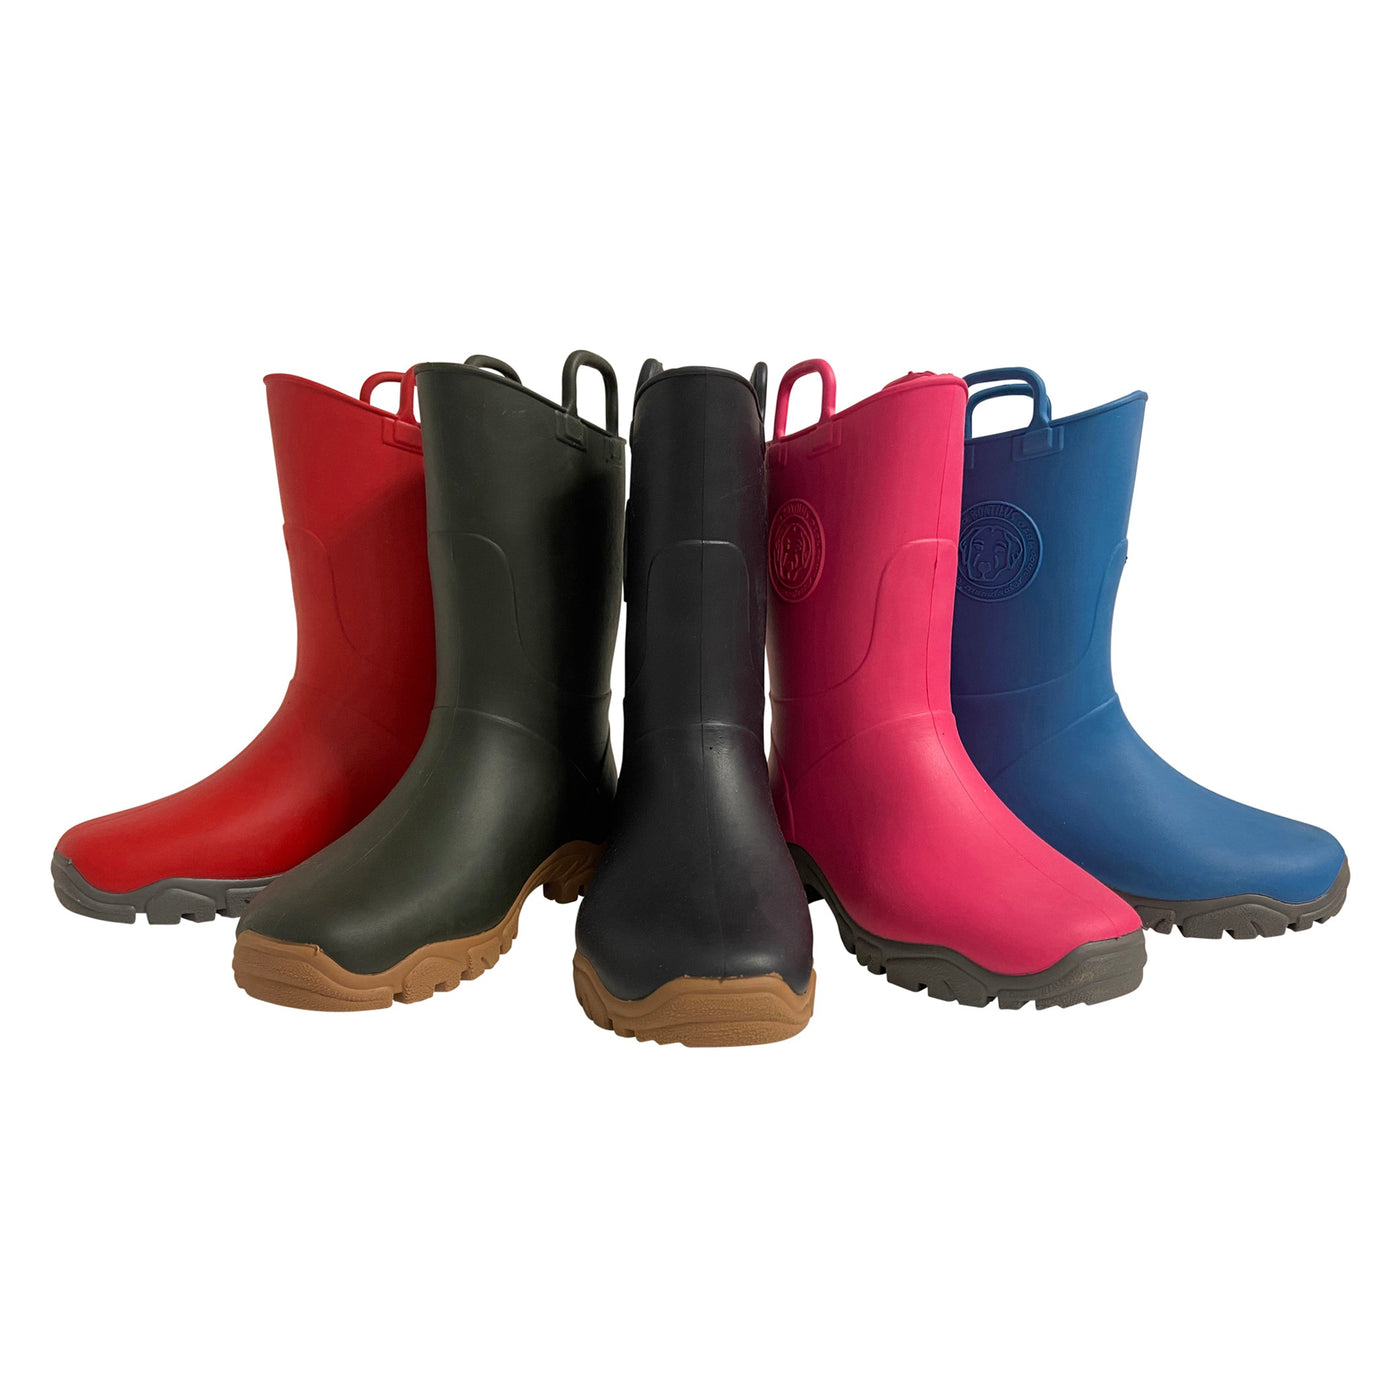 Boatilus Ducky Welly Boot Navy/Brown